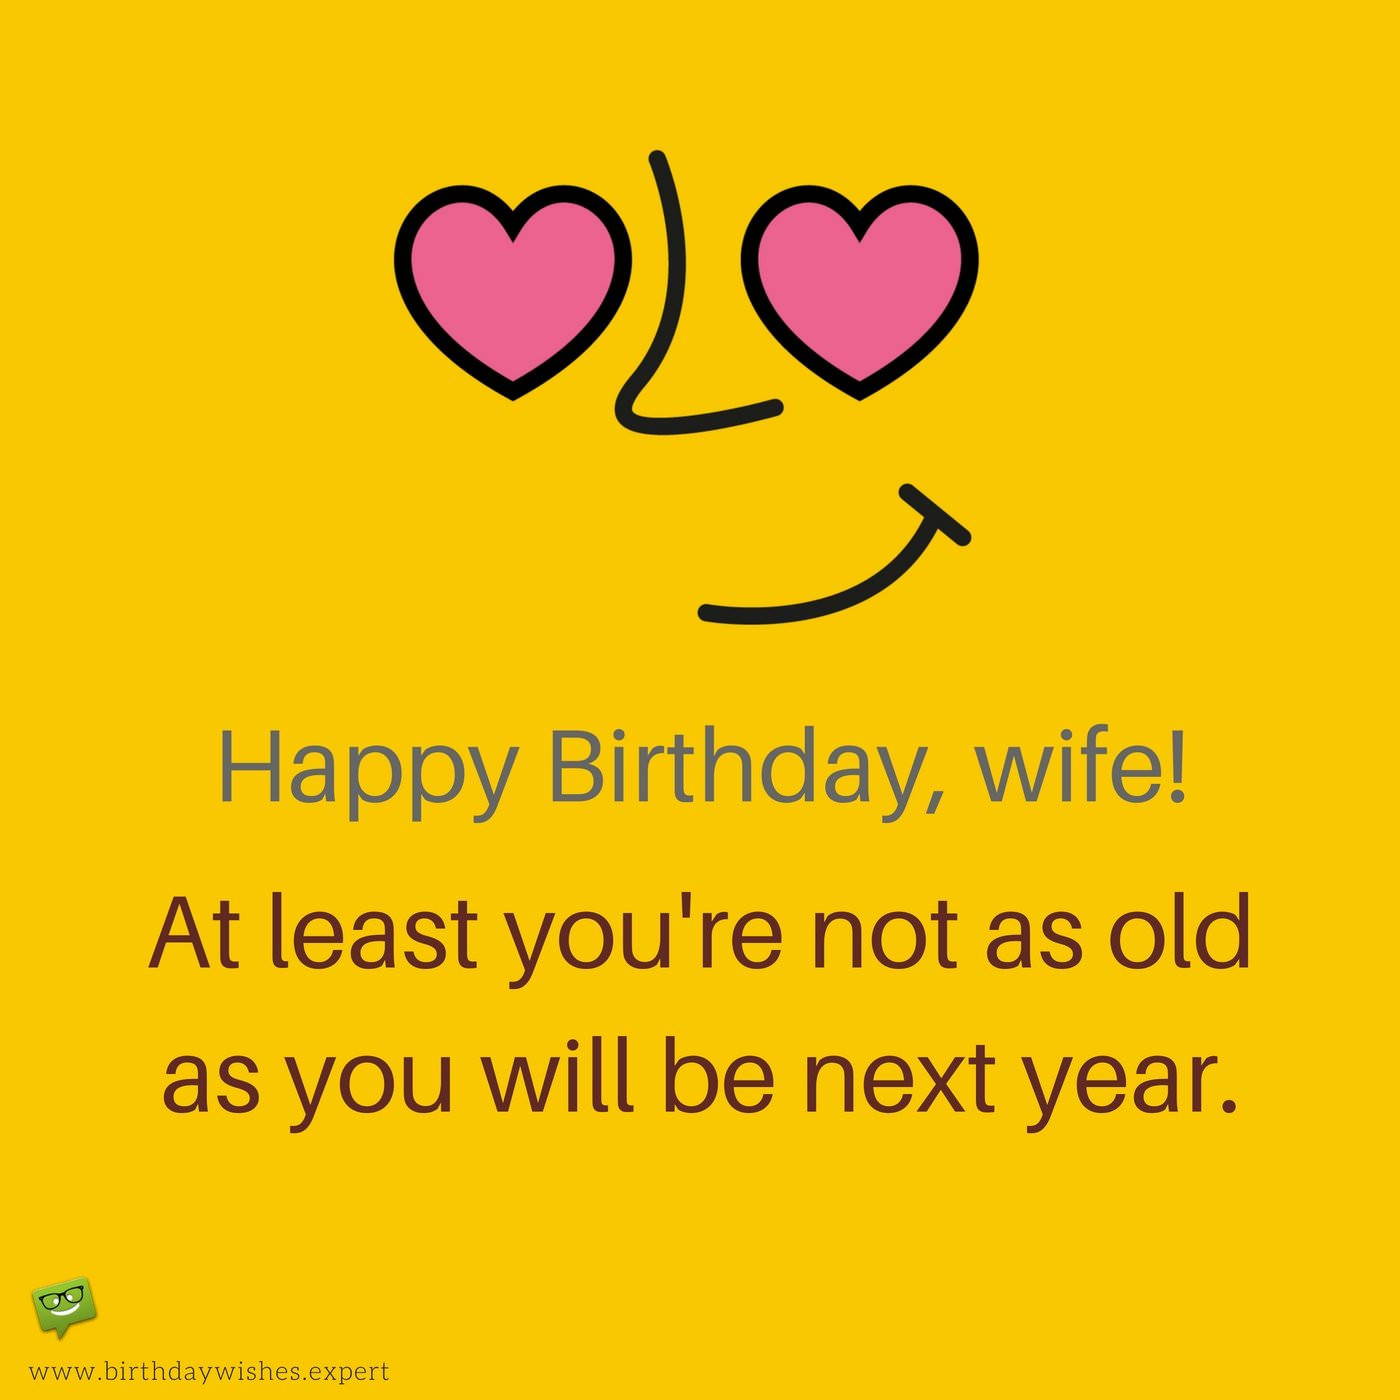 Funny Wife Birthday Cards
 The Funniest Wishes to Make your Wife Smile on her Birthday